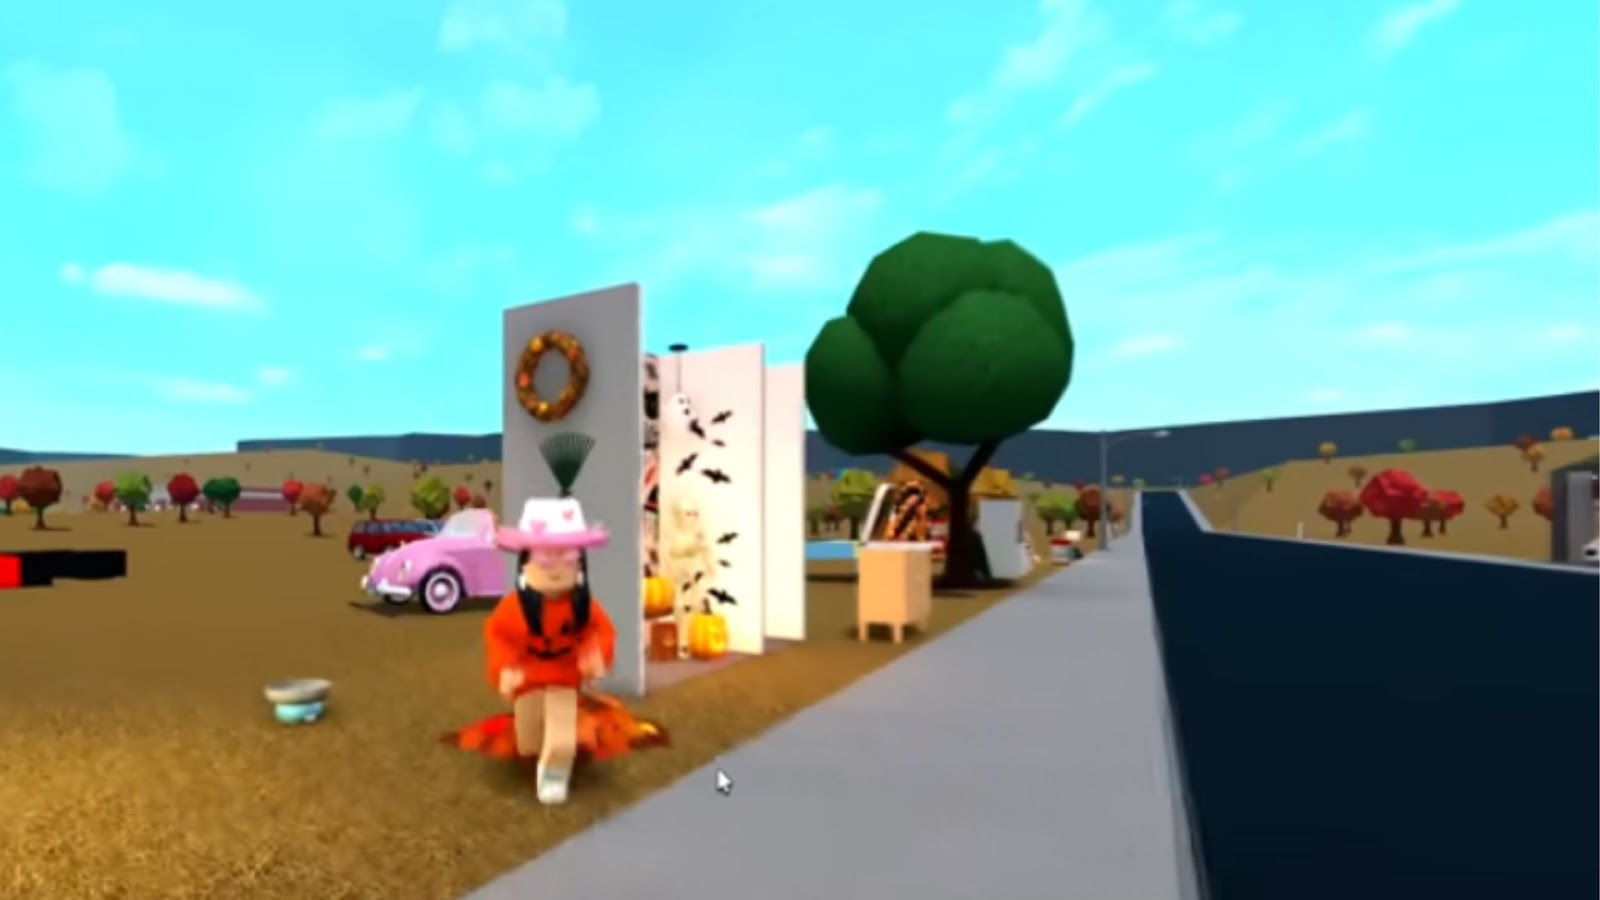 what we can expect for the BLOXBURG FALL/HALLOWEEN Update 